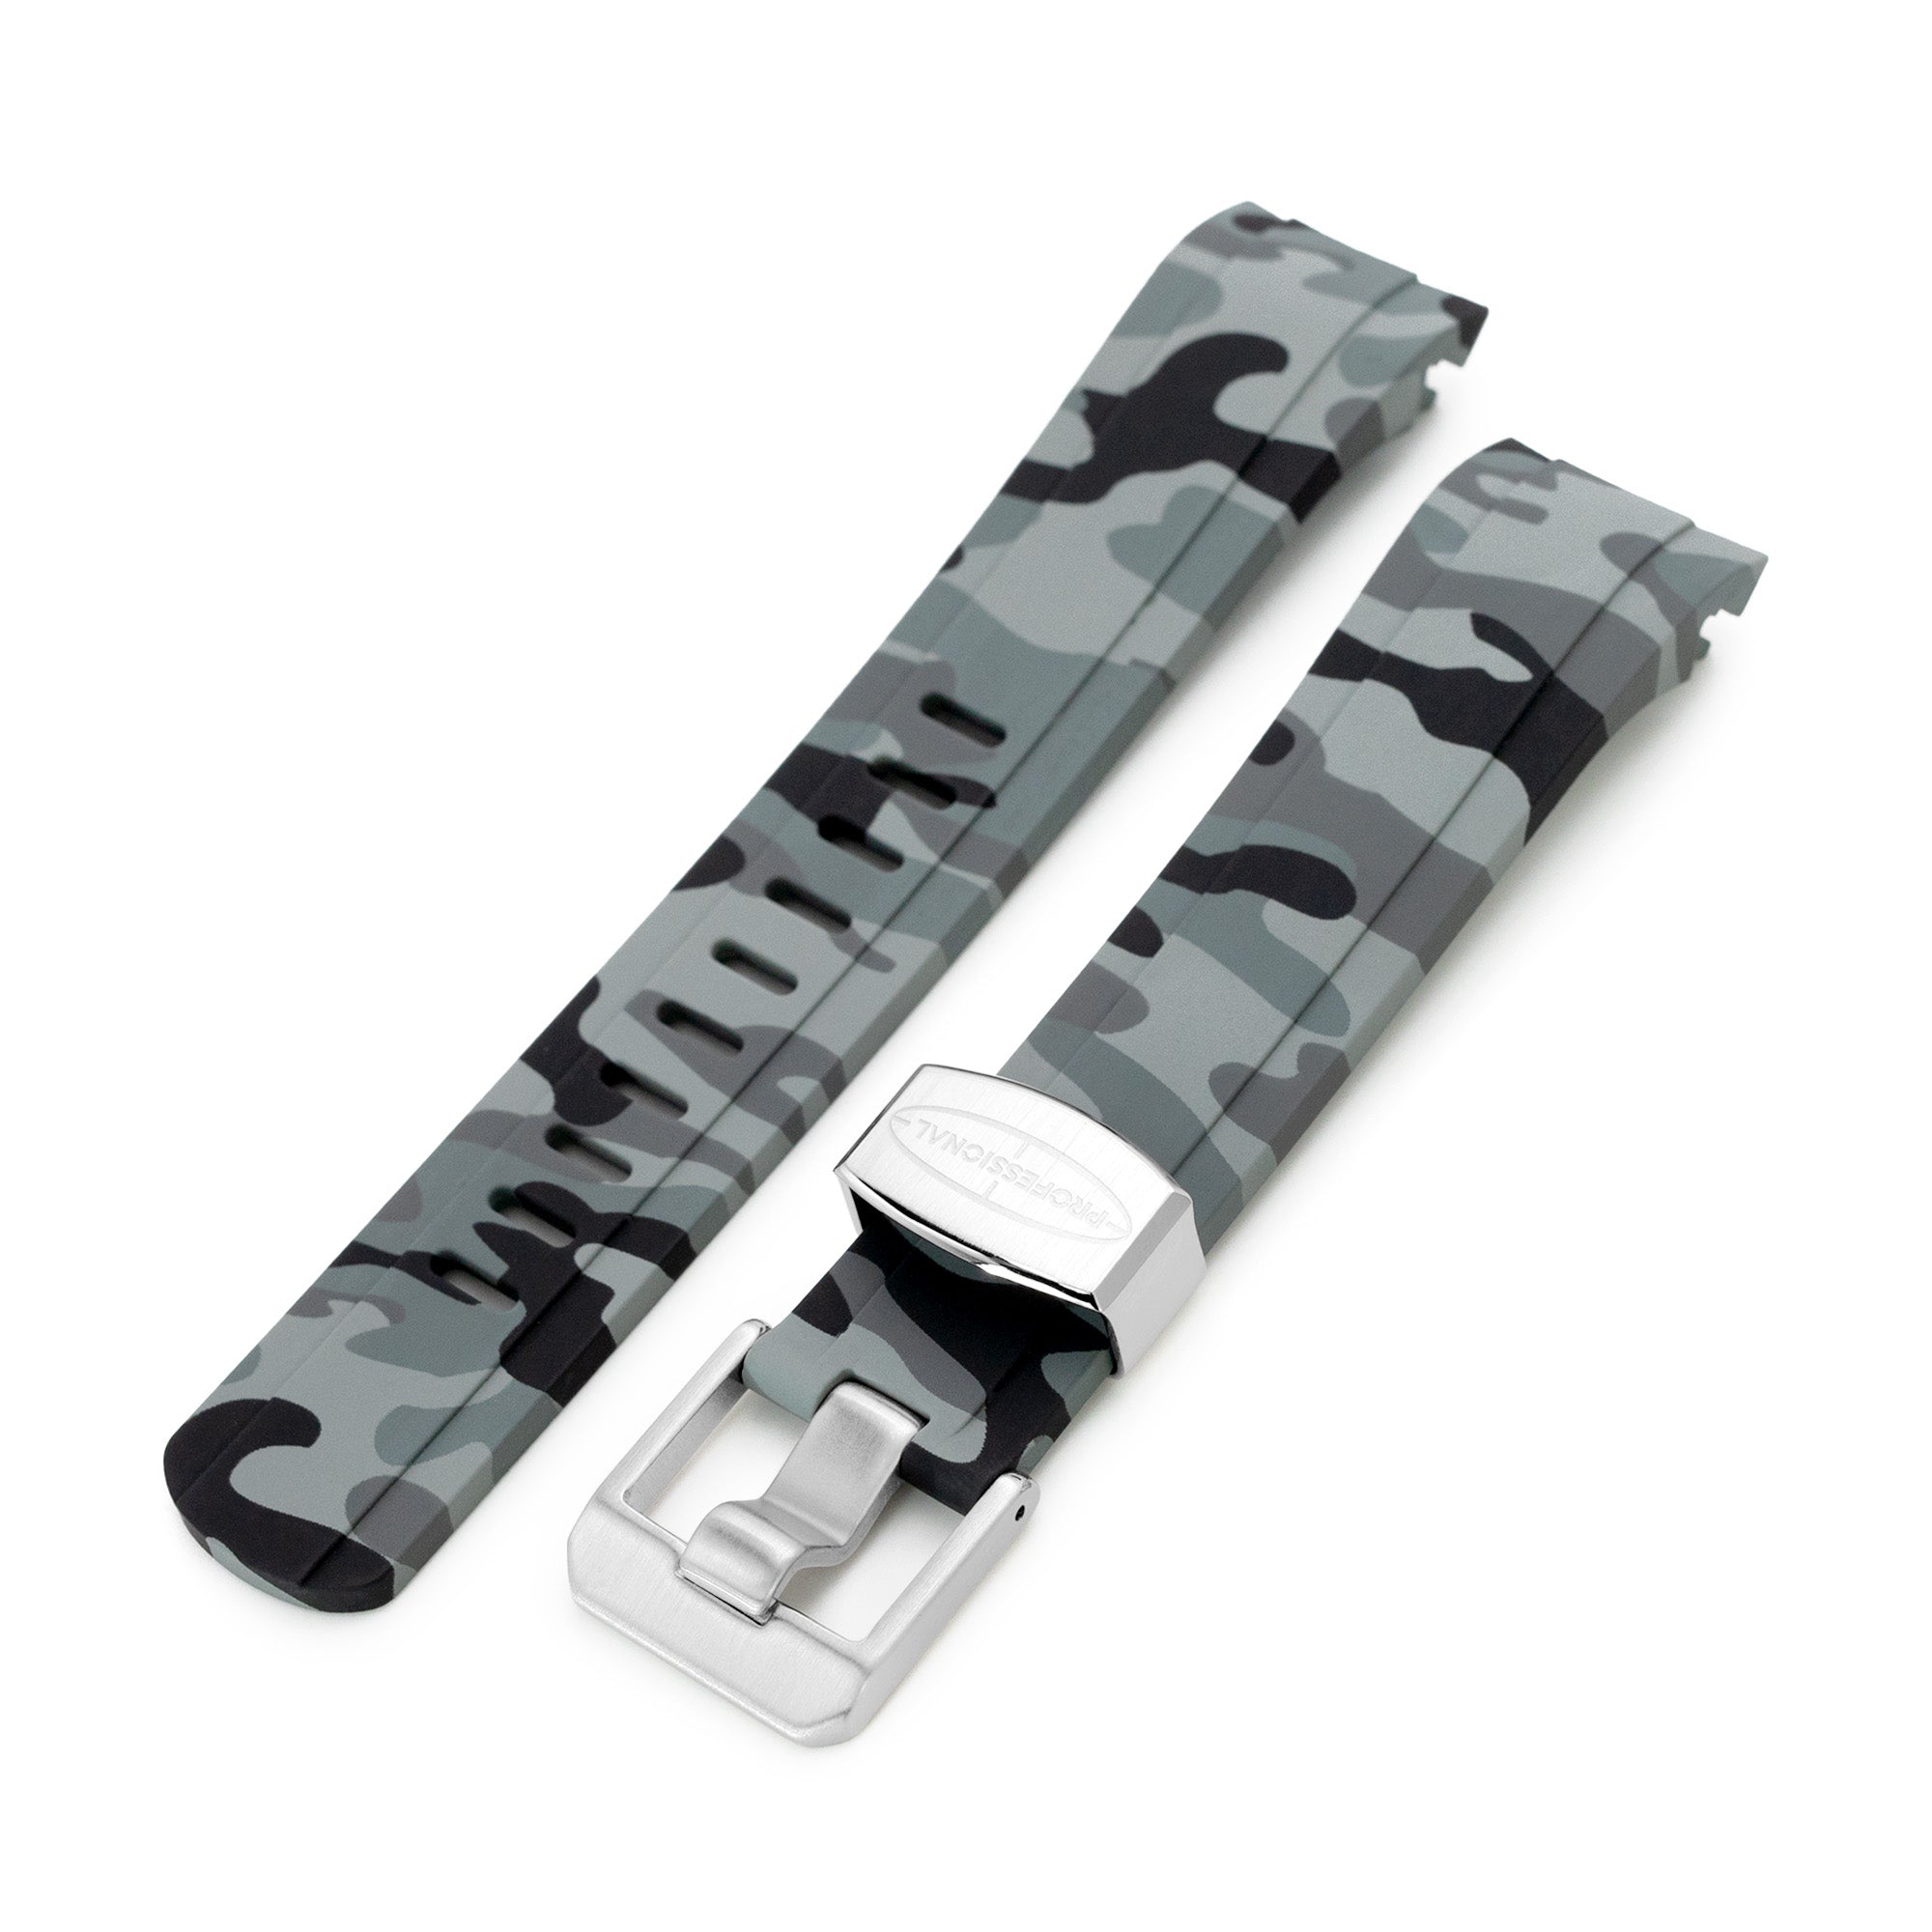 22mm Crafter Blue - CB10 Navy Camouflage Rubber Curved Lug Watch Band for Seiko SKX007 Strapcode Watch Bands